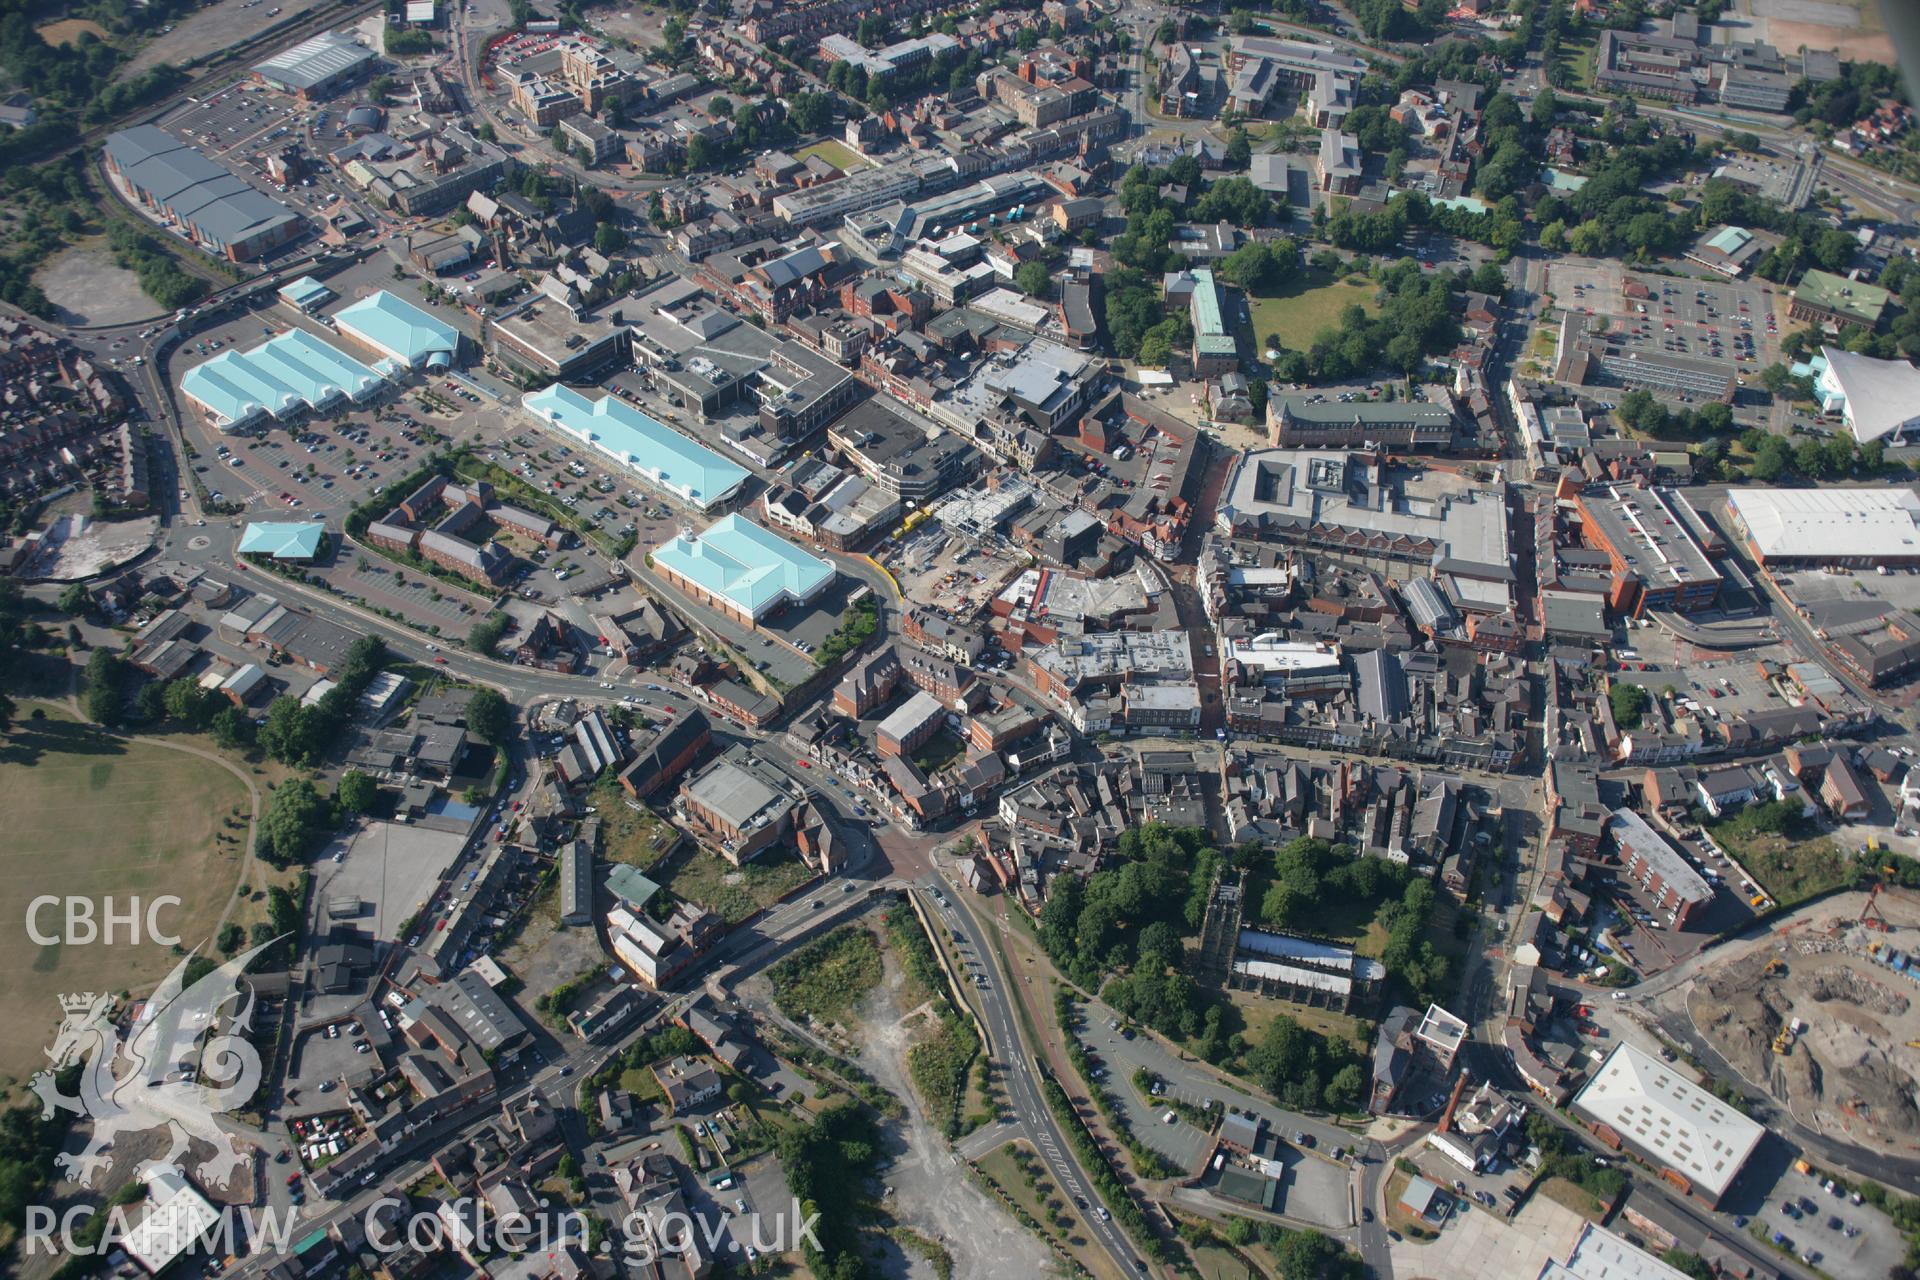 RCAHMW colour oblique aerial photograph of Wrexham. Taken on 17 July 2006 by Toby Driver.